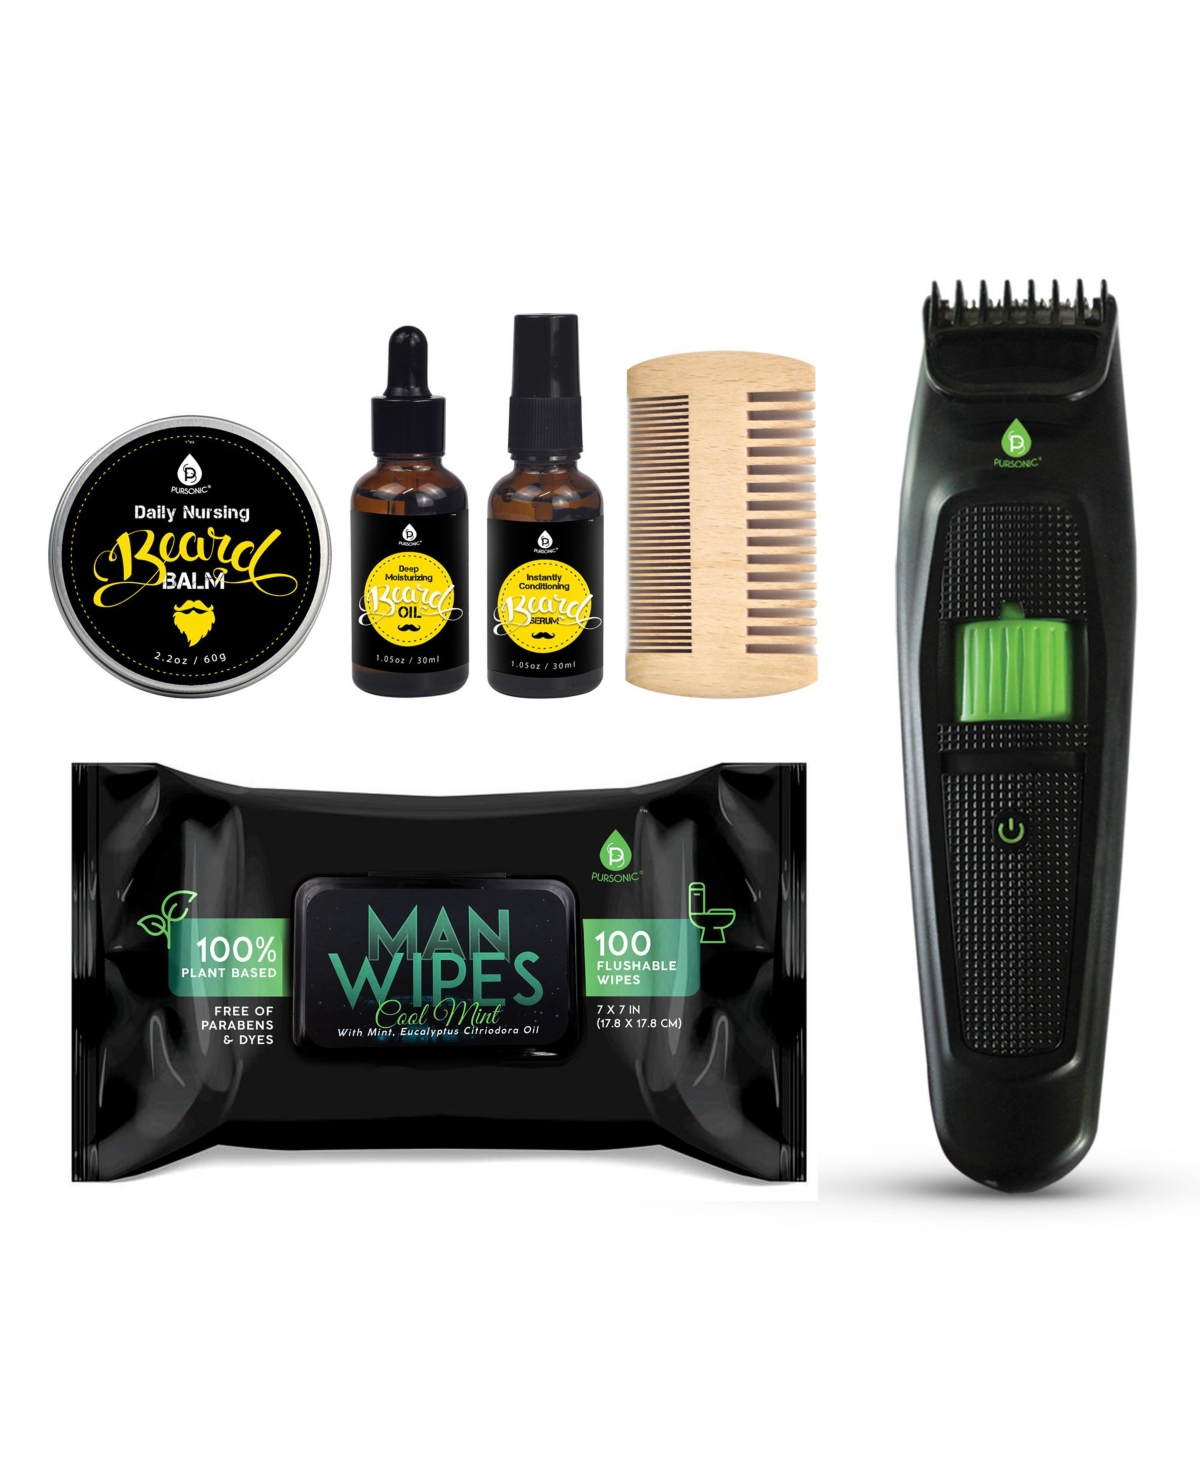 Ultimate Grooming Kit: Rechargeable Men's Shaver, Beard Care Set, and Man Wipes Bundle - Black